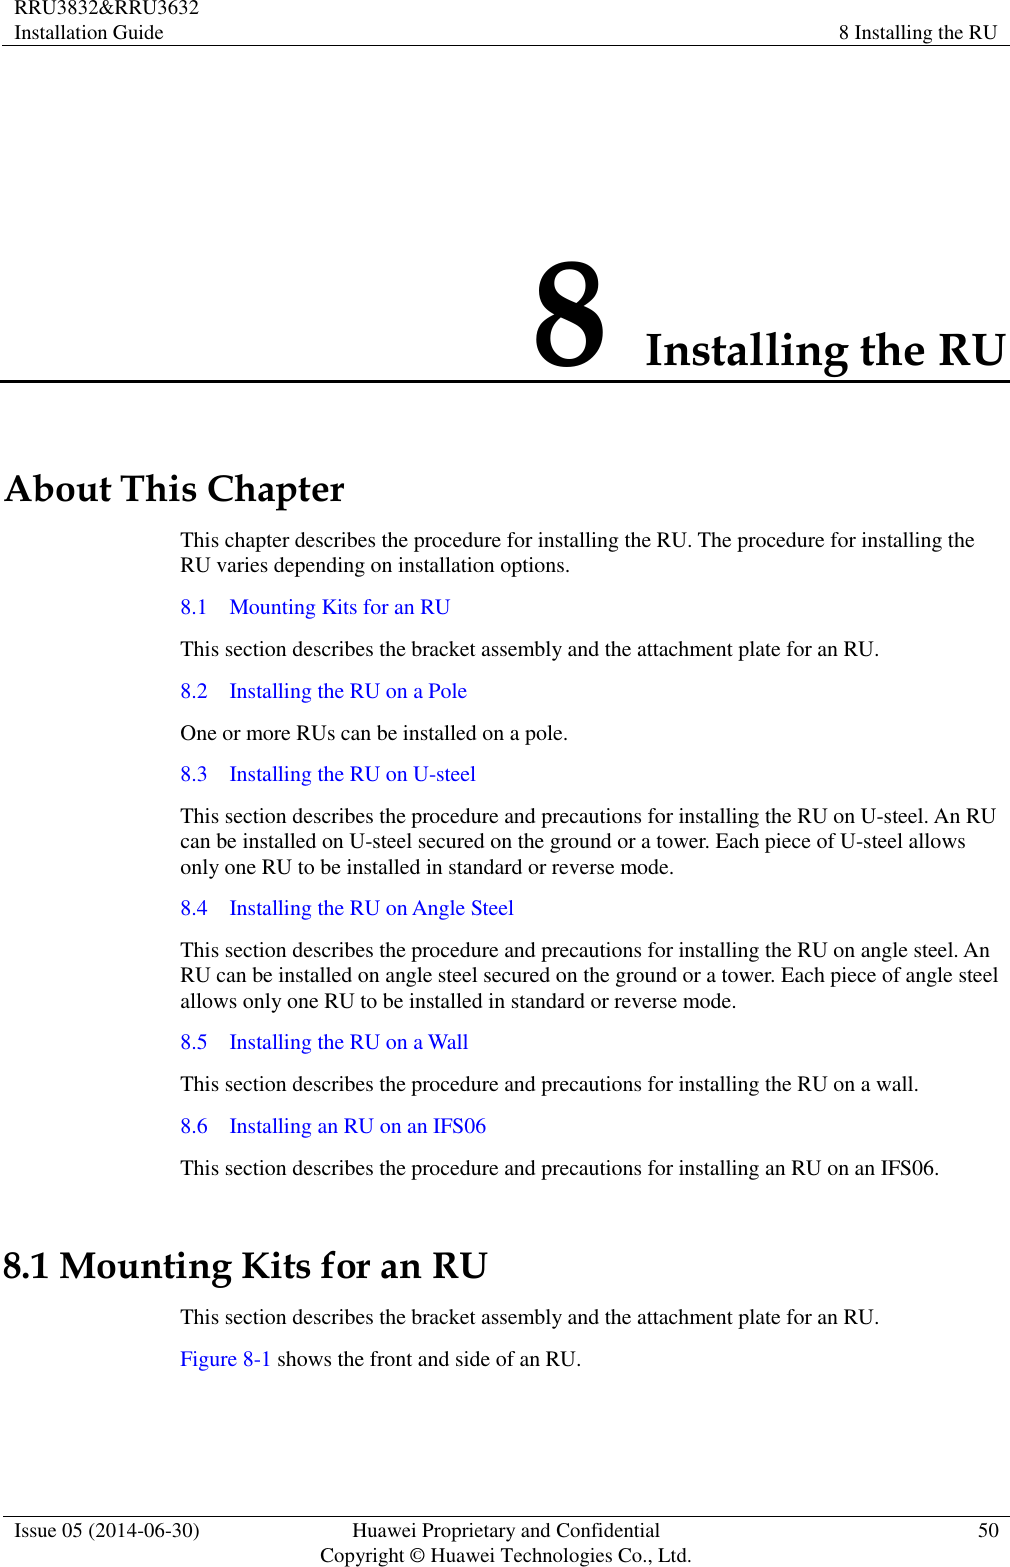 RRU3832&amp;RRU3632 Installation Guide 8 Installing the RU  Issue 05 (2014-06-30) Huawei Proprietary and Confidential                                     Copyright © Huawei Technologies Co., Ltd. 50  8 Installing the RU About This Chapter This chapter describes the procedure for installing the RU. The procedure for installing the RU varies depending on installation options. 8.1    Mounting Kits for an RU This section describes the bracket assembly and the attachment plate for an RU. 8.2    Installing the RU on a Pole One or more RUs can be installed on a pole. 8.3    Installing the RU on U-steel This section describes the procedure and precautions for installing the RU on U-steel. An RU can be installed on U-steel secured on the ground or a tower. Each piece of U-steel allows only one RU to be installed in standard or reverse mode. 8.4    Installing the RU on Angle Steel This section describes the procedure and precautions for installing the RU on angle steel. An RU can be installed on angle steel secured on the ground or a tower. Each piece of angle steel allows only one RU to be installed in standard or reverse mode. 8.5    Installing the RU on a Wall This section describes the procedure and precautions for installing the RU on a wall. 8.6    Installing an RU on an IFS06 This section describes the procedure and precautions for installing an RU on an IFS06. 8.1 Mounting Kits for an RU This section describes the bracket assembly and the attachment plate for an RU. Figure 8-1 shows the front and side of an RU. 